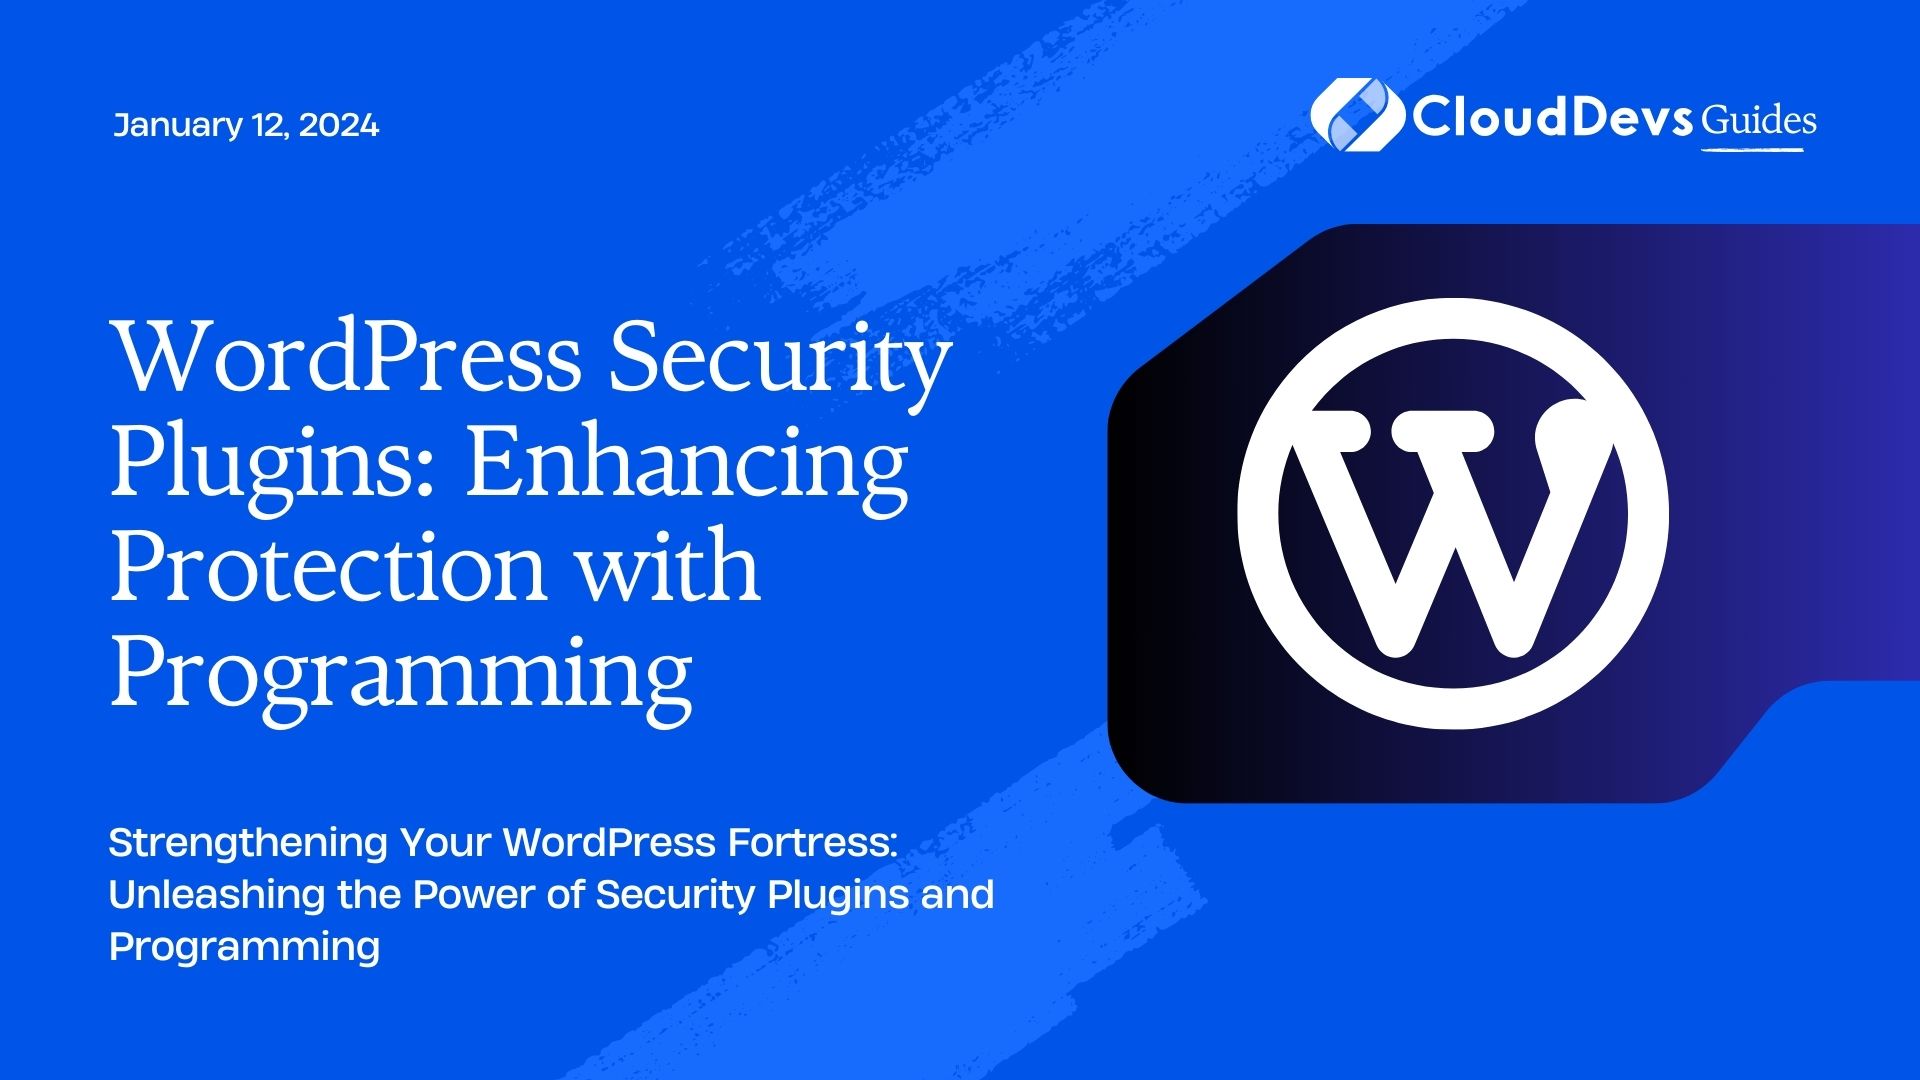 WordPress Security Plugins: Enhancing Protection with Programming